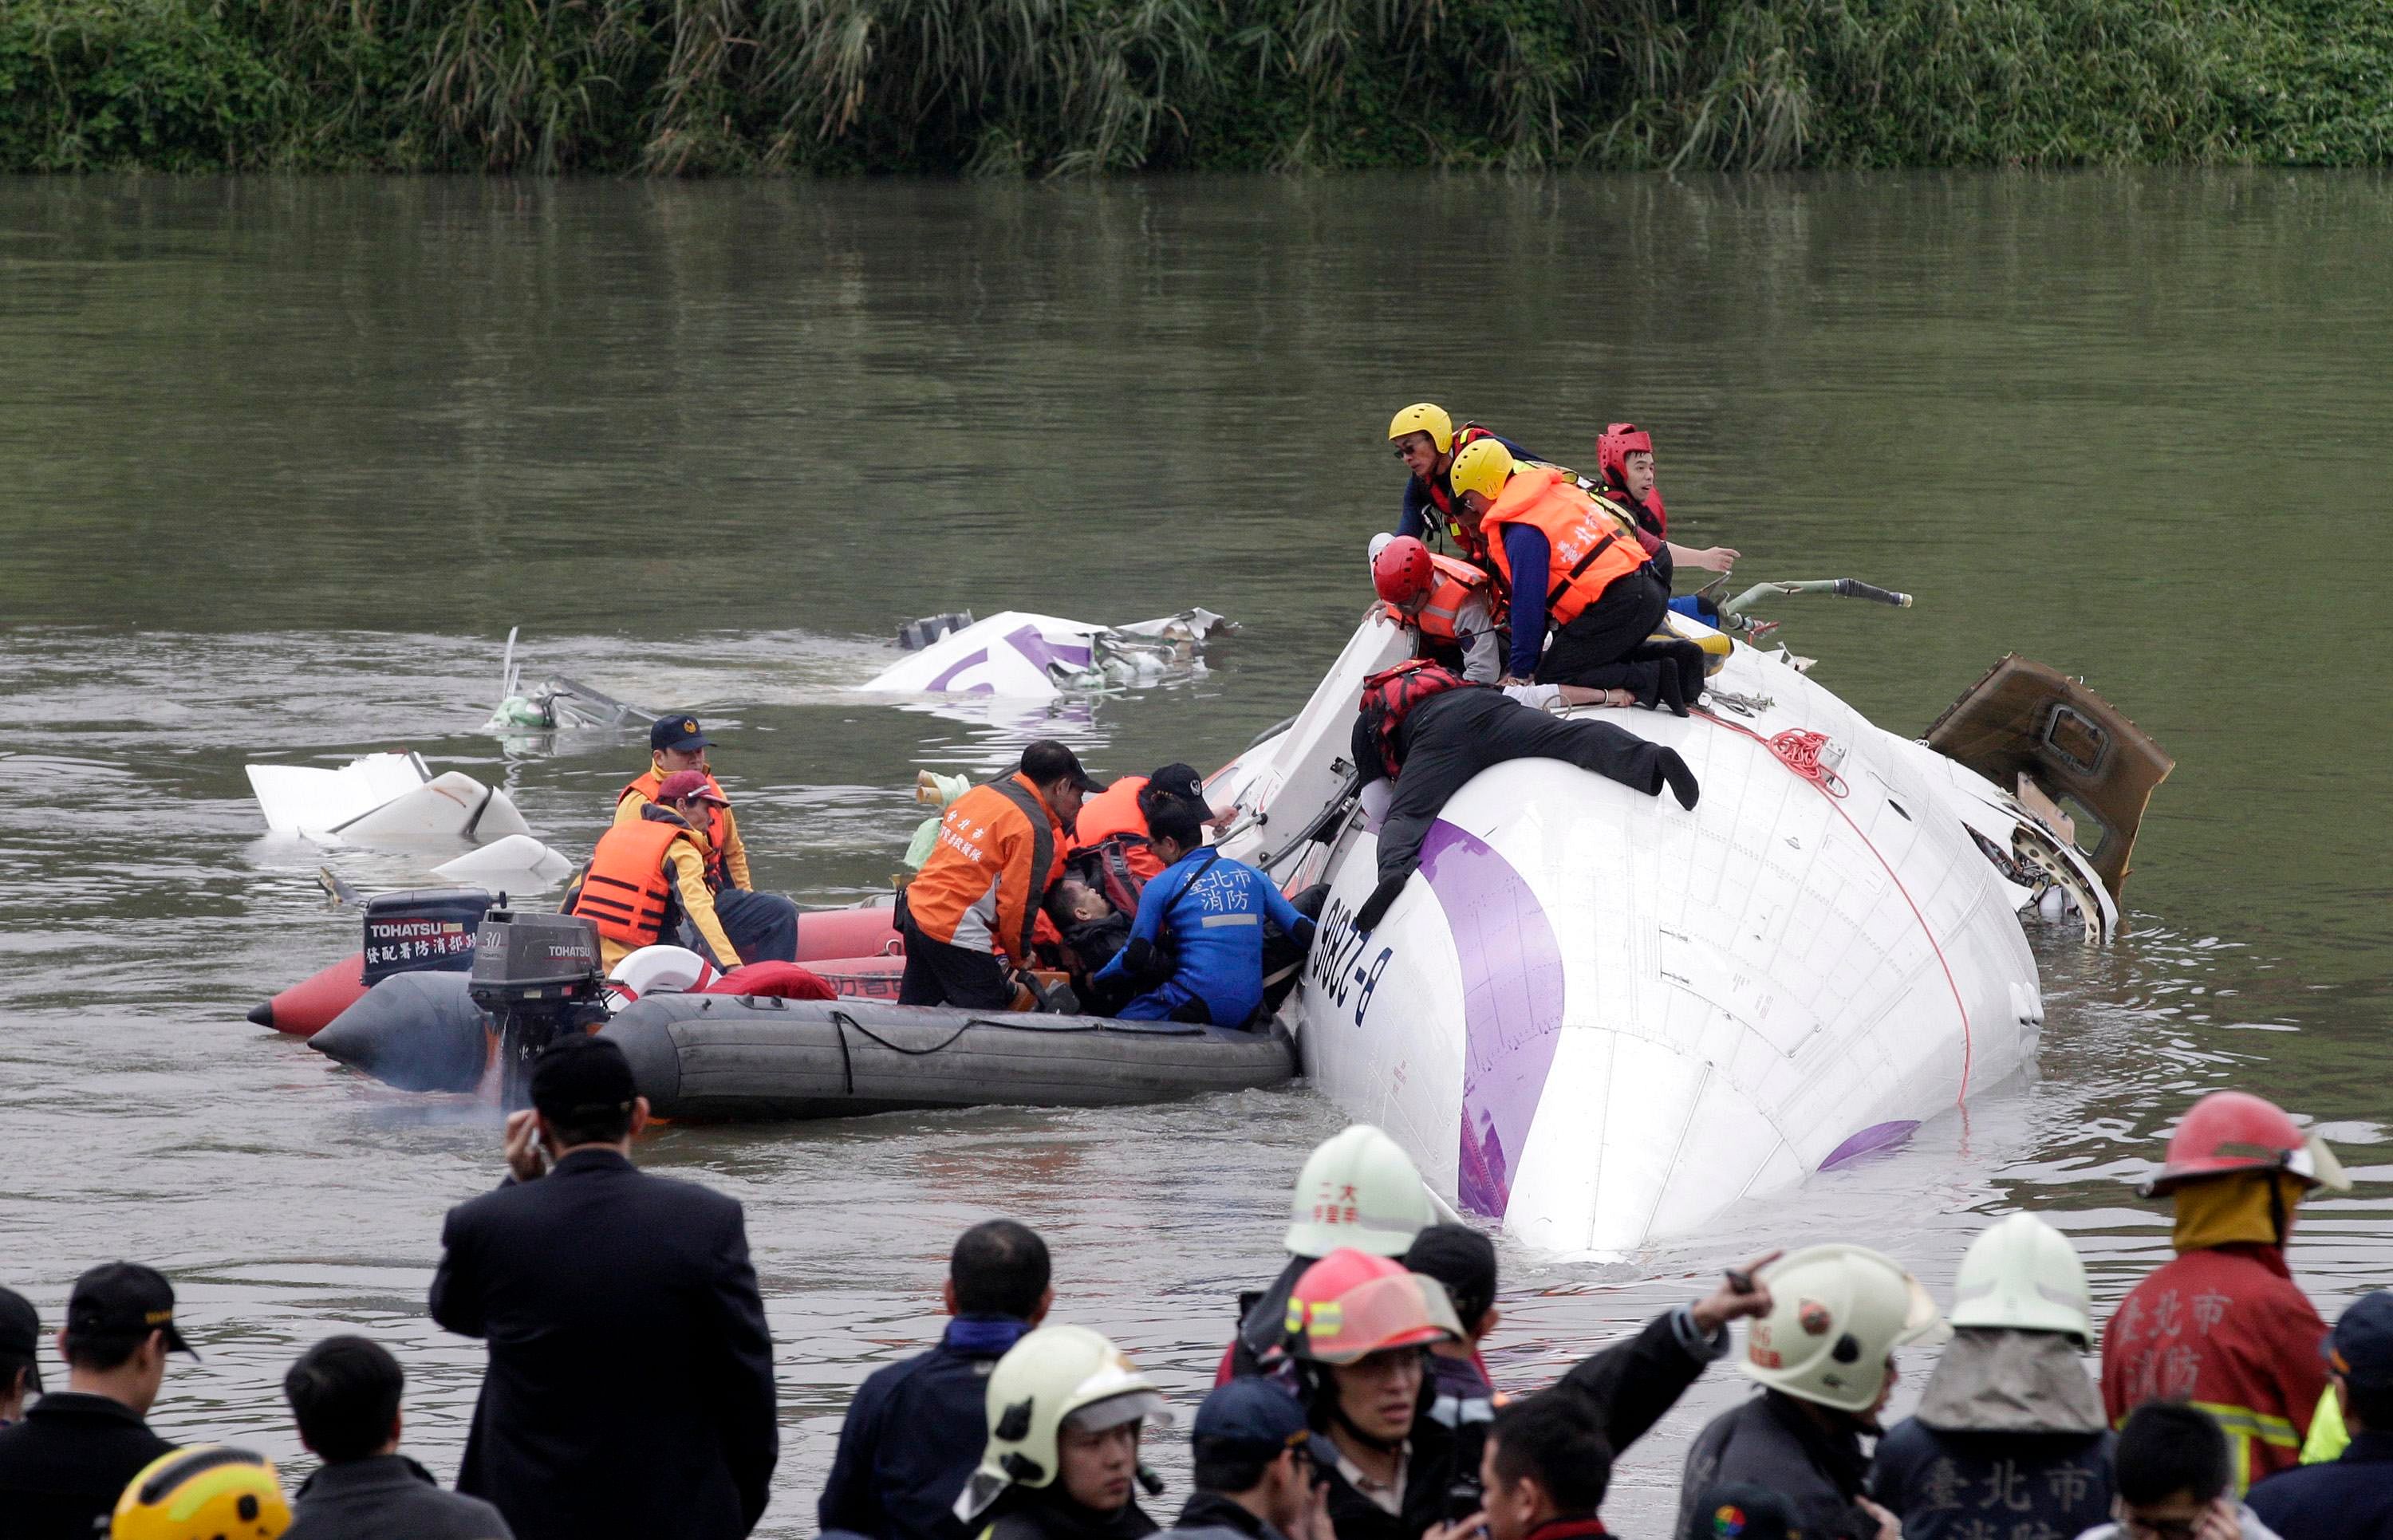 Rescuers pull a passenger out of the TransAsia Airways plane which crash landed in a river, in New Taipei City, February 4, 2015. Photo: Reuters